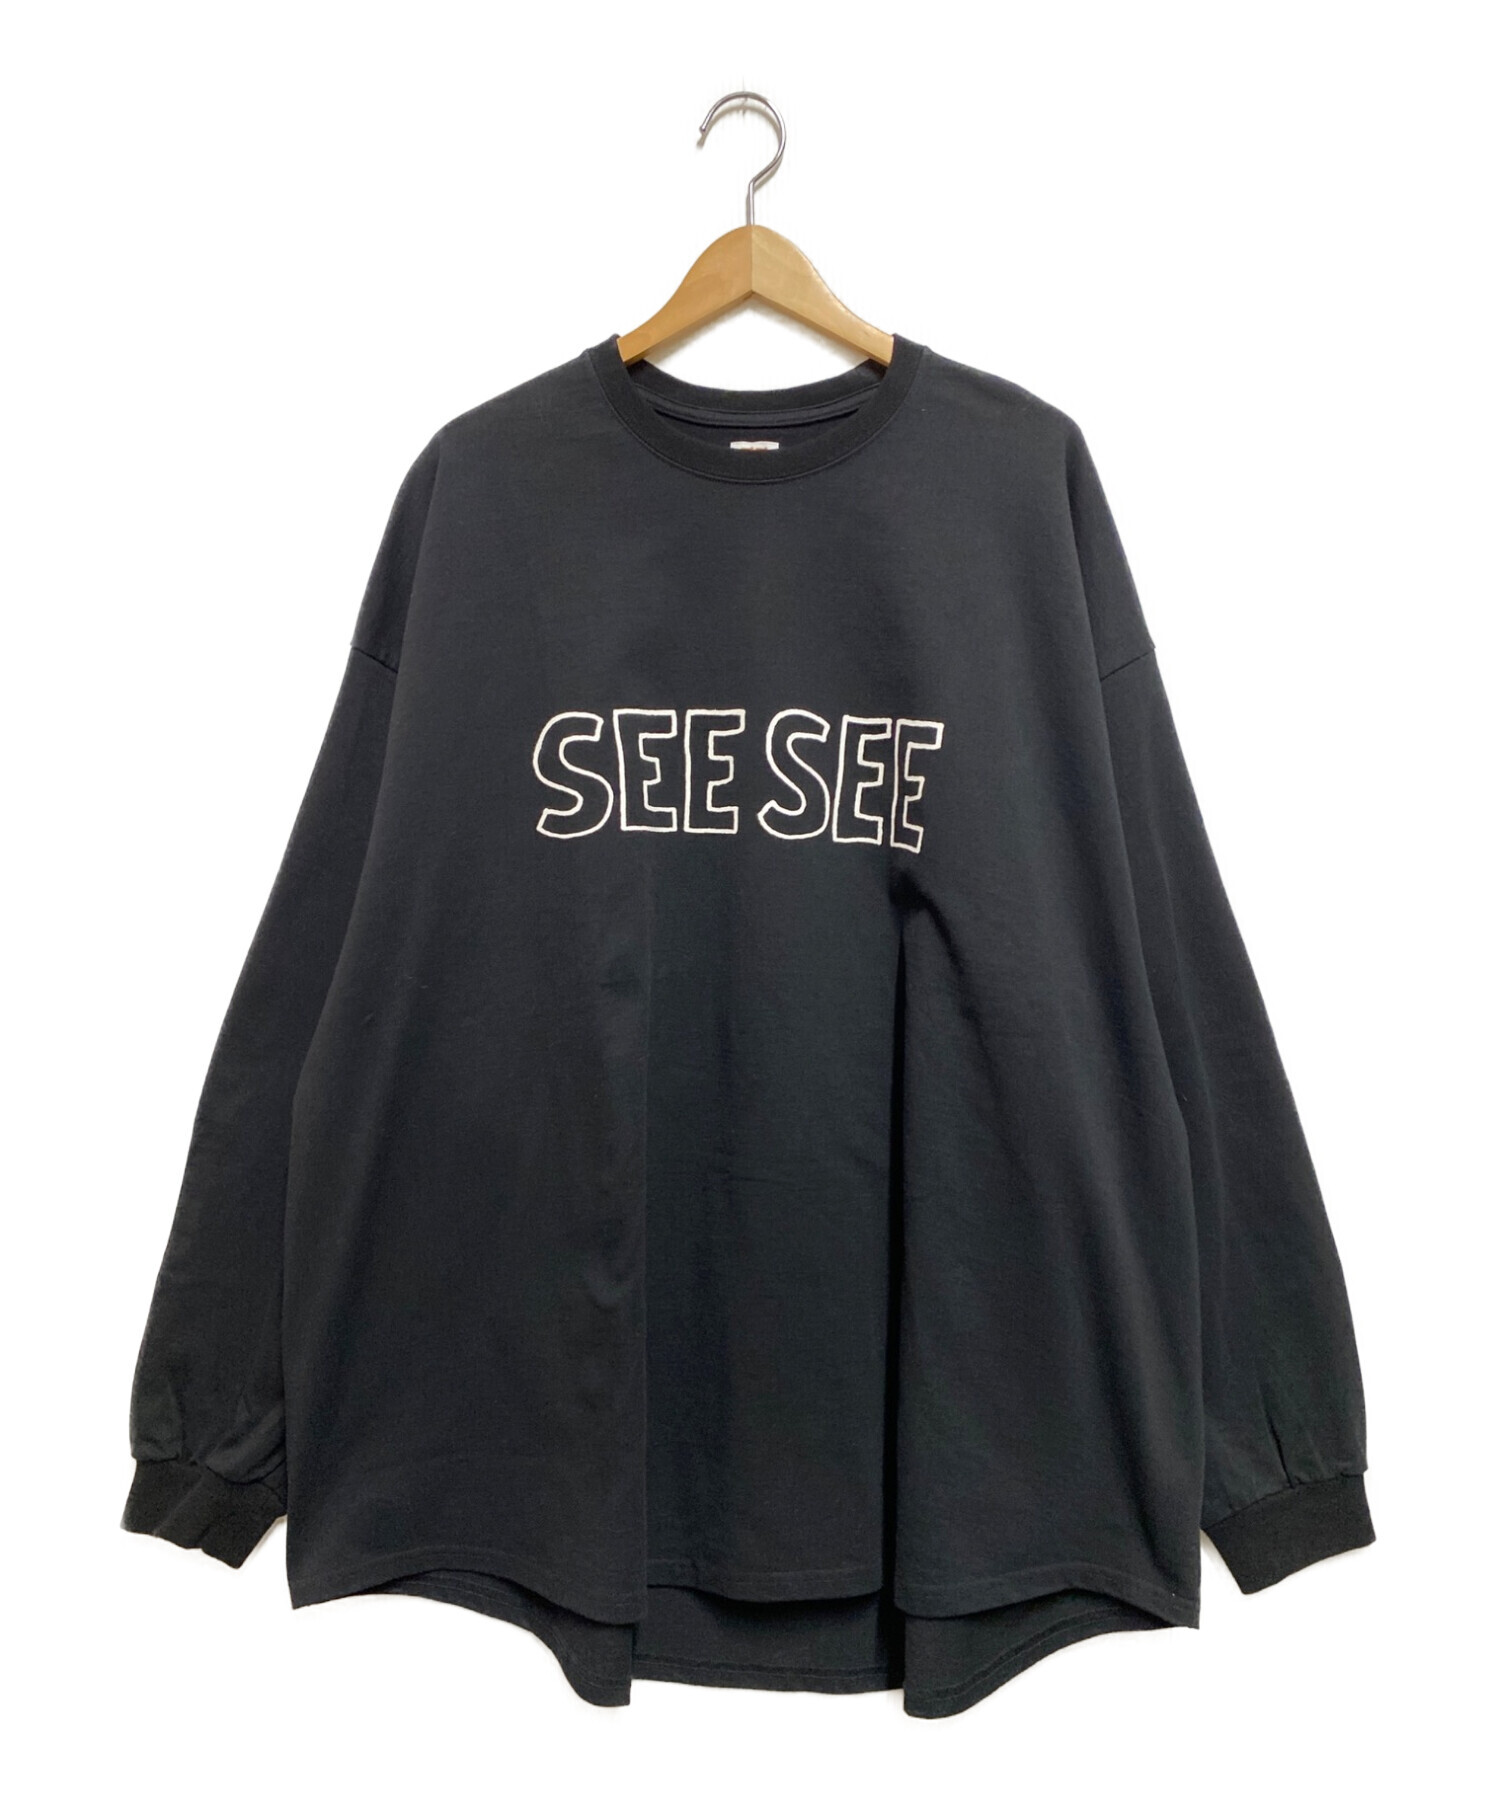 SEESEE】 SEE SEE NEW LOGO CREW GREY XL - スウェット